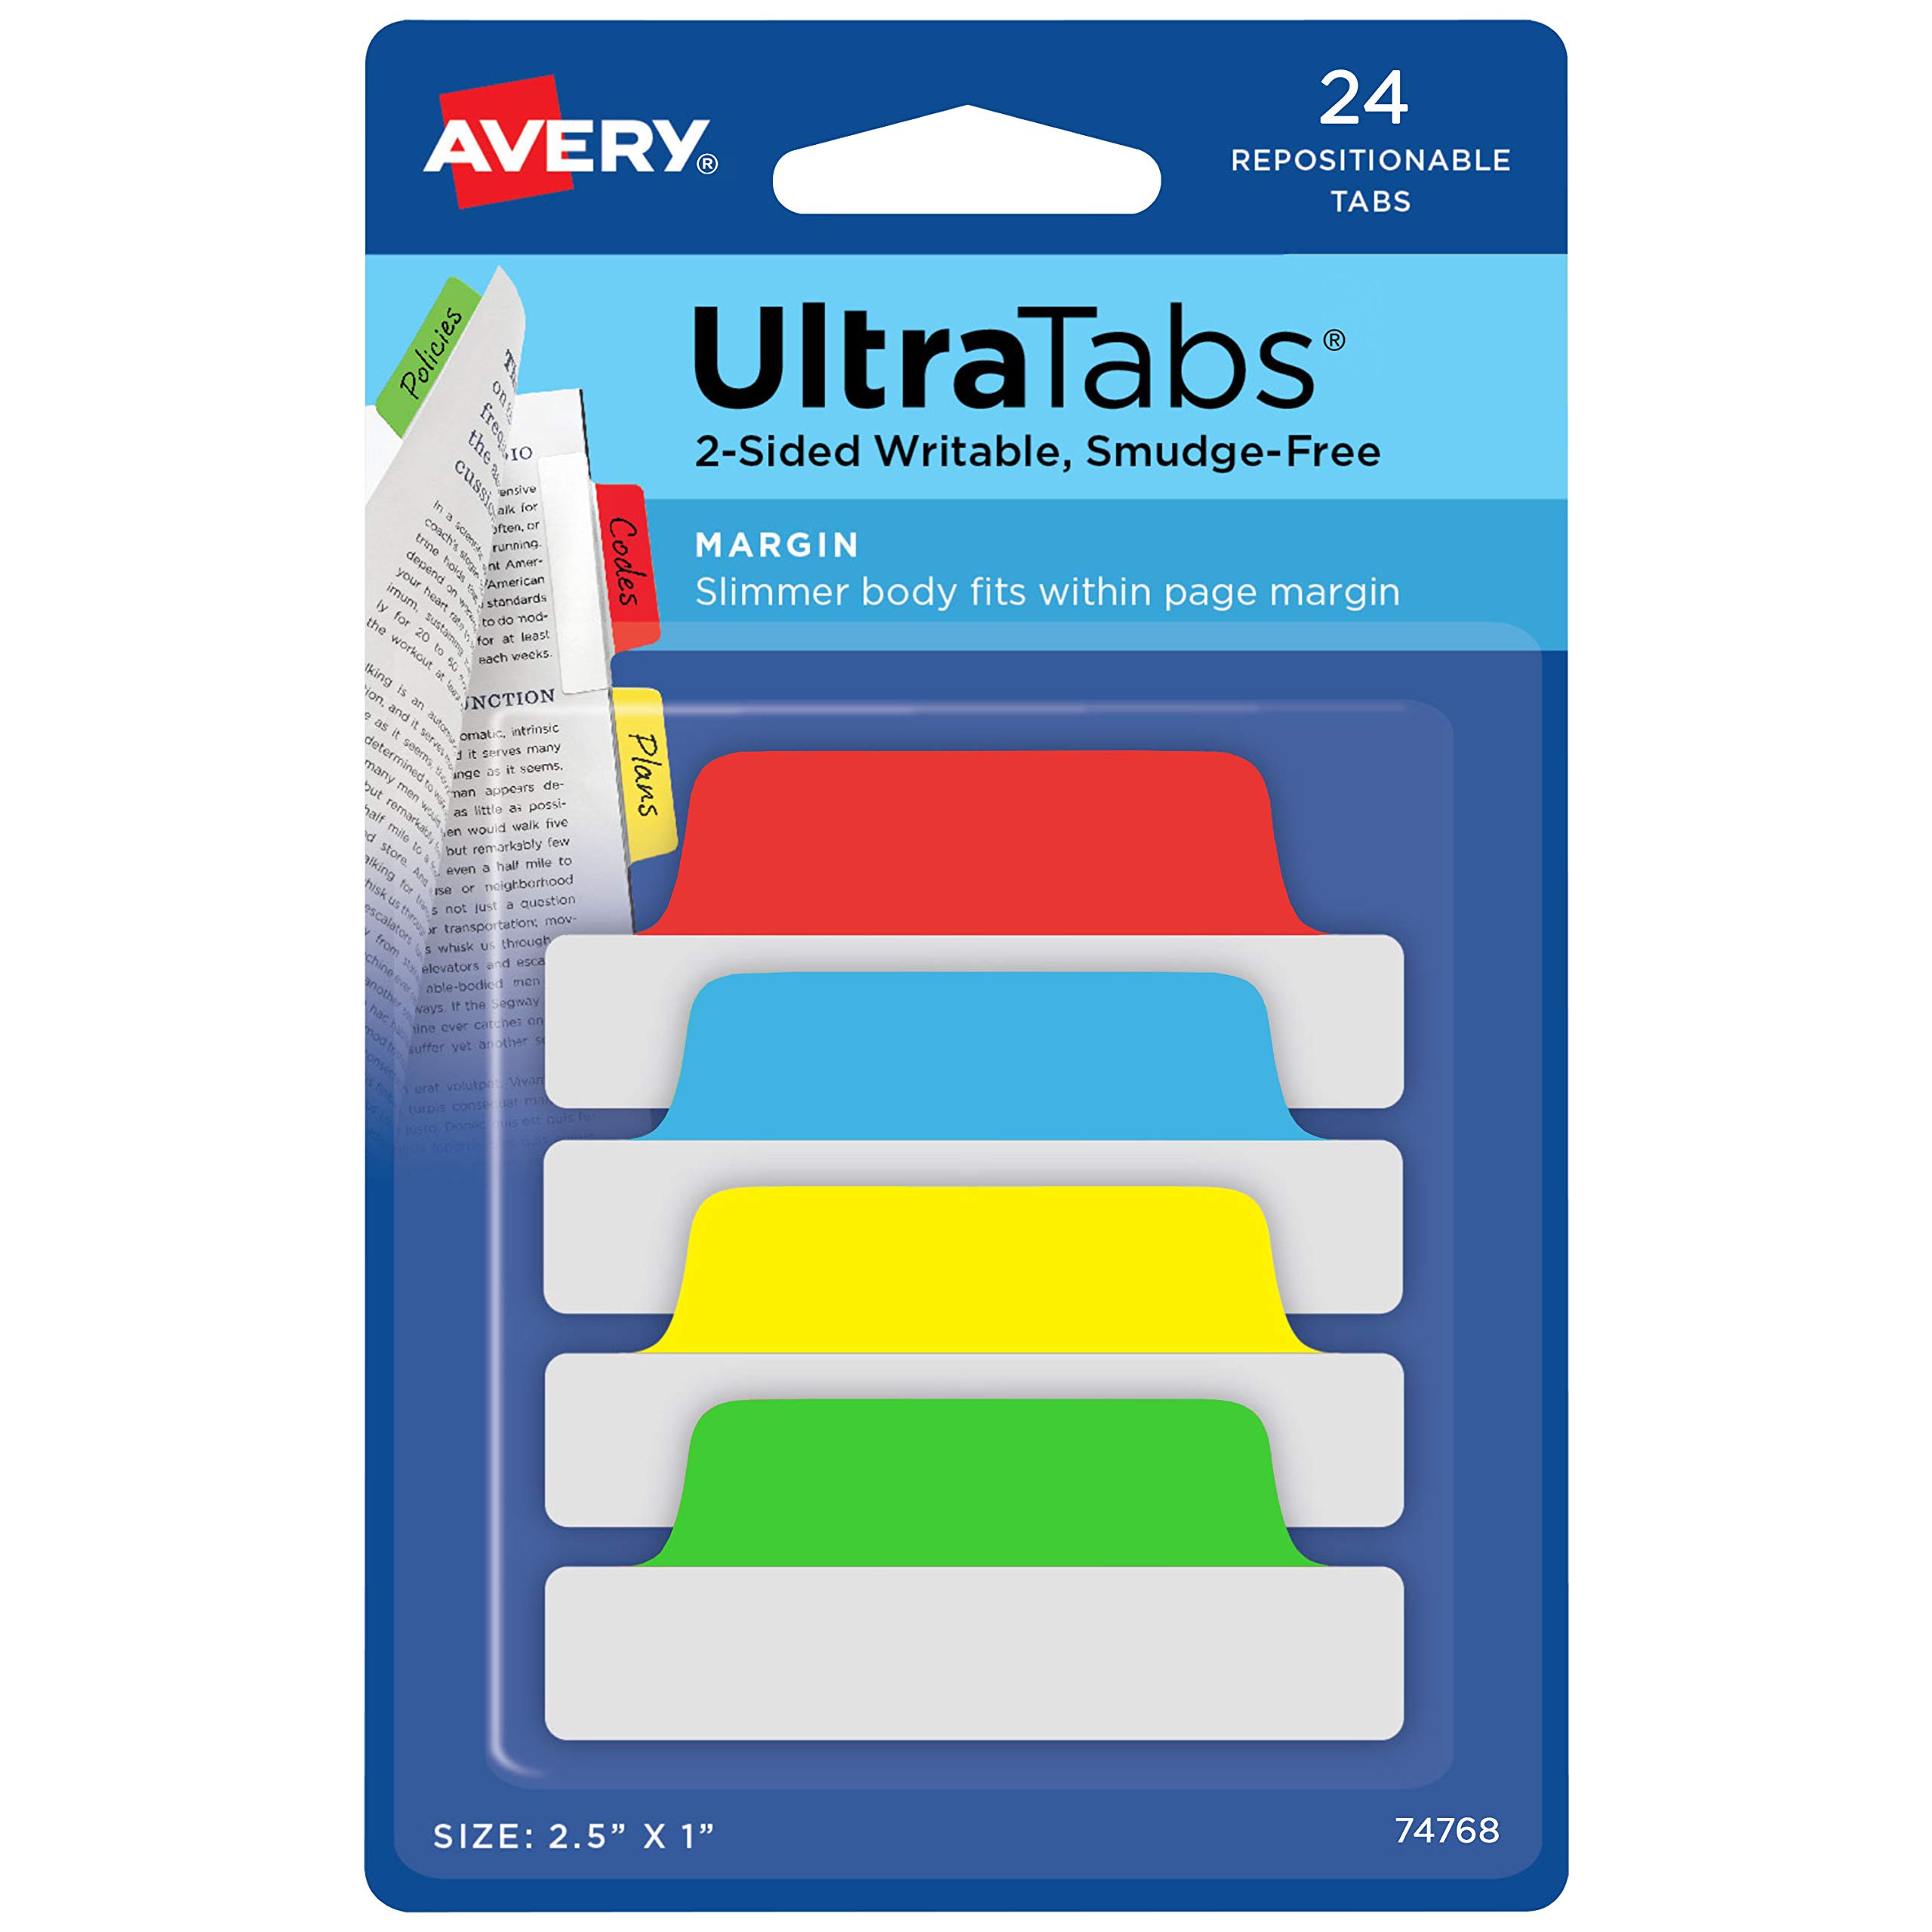 Avery Margin Ultra Side Writable Assorted Colors 24 Rep...